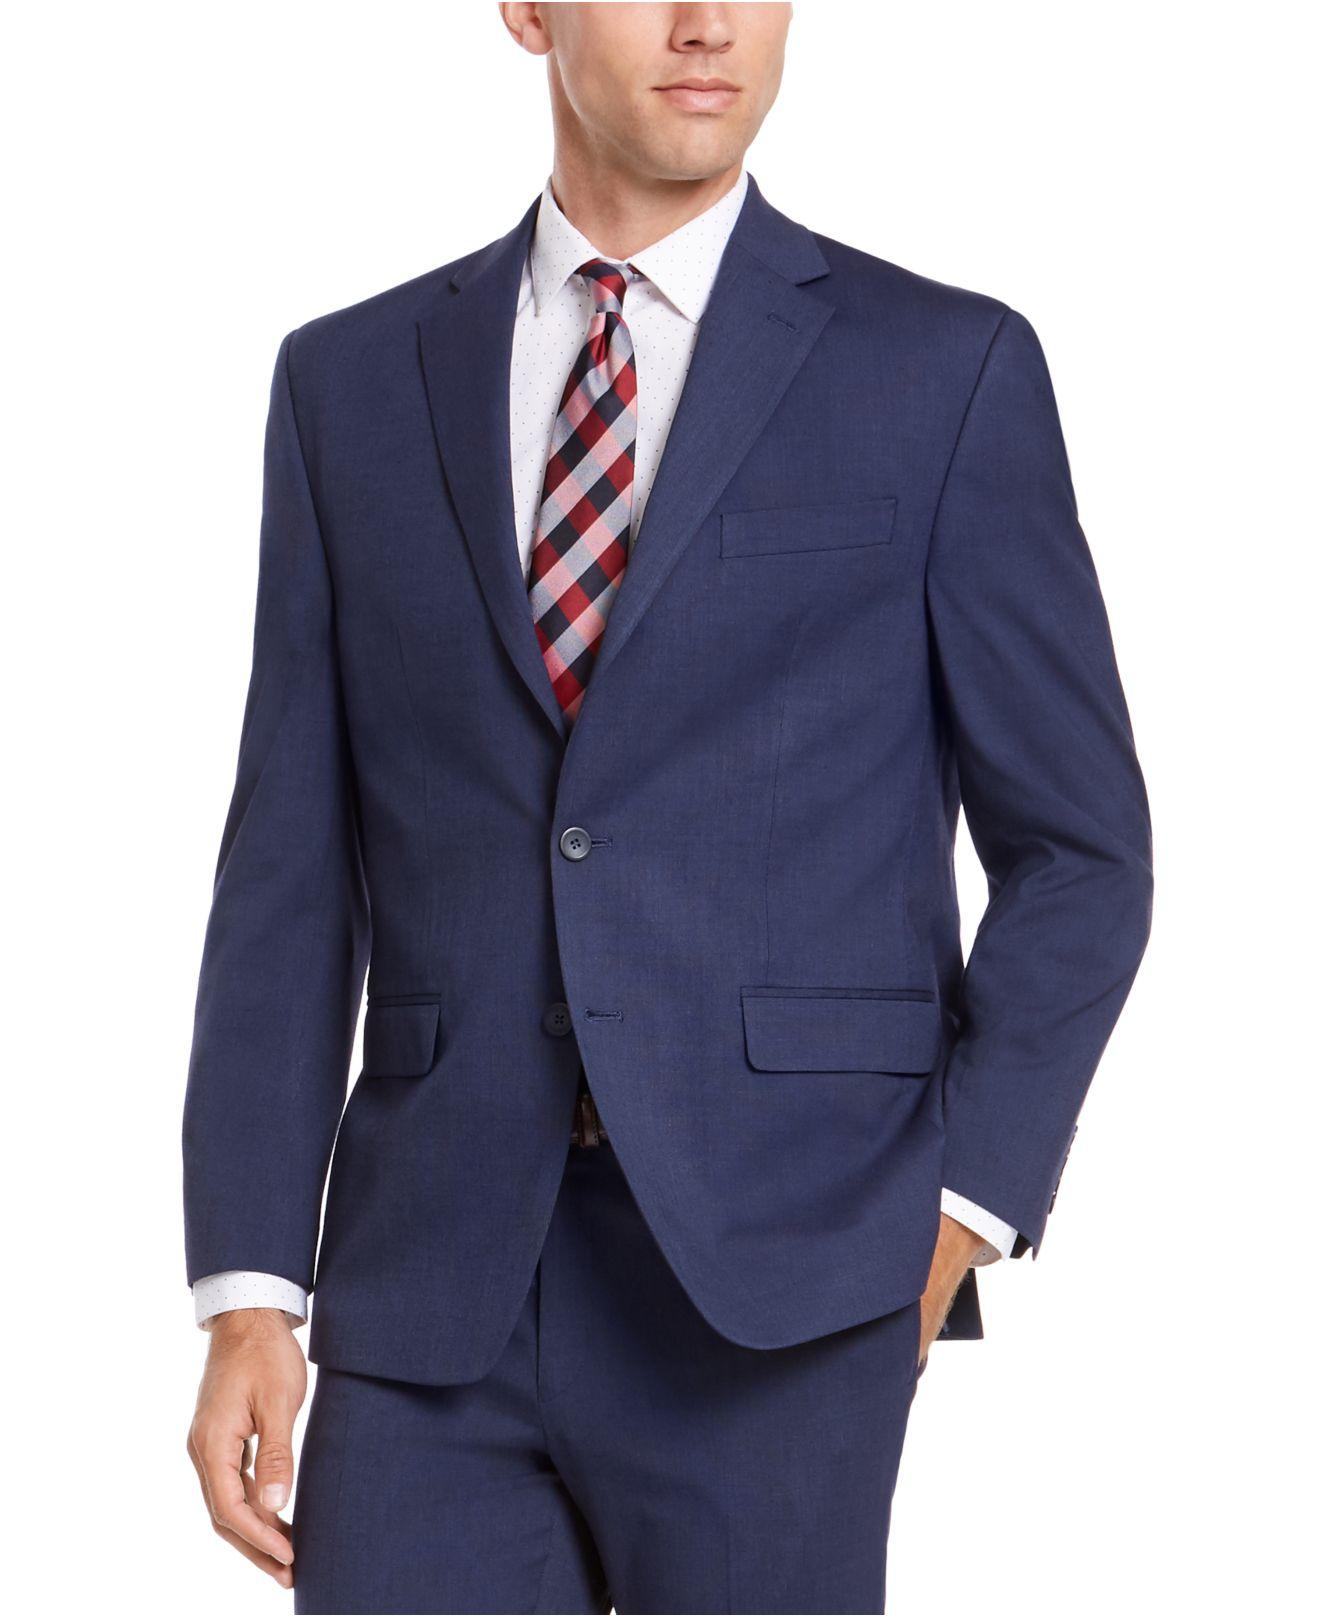 Izod Synthetic Classic-fit Medium Blue Solid Suit Jacket for Men - Lyst